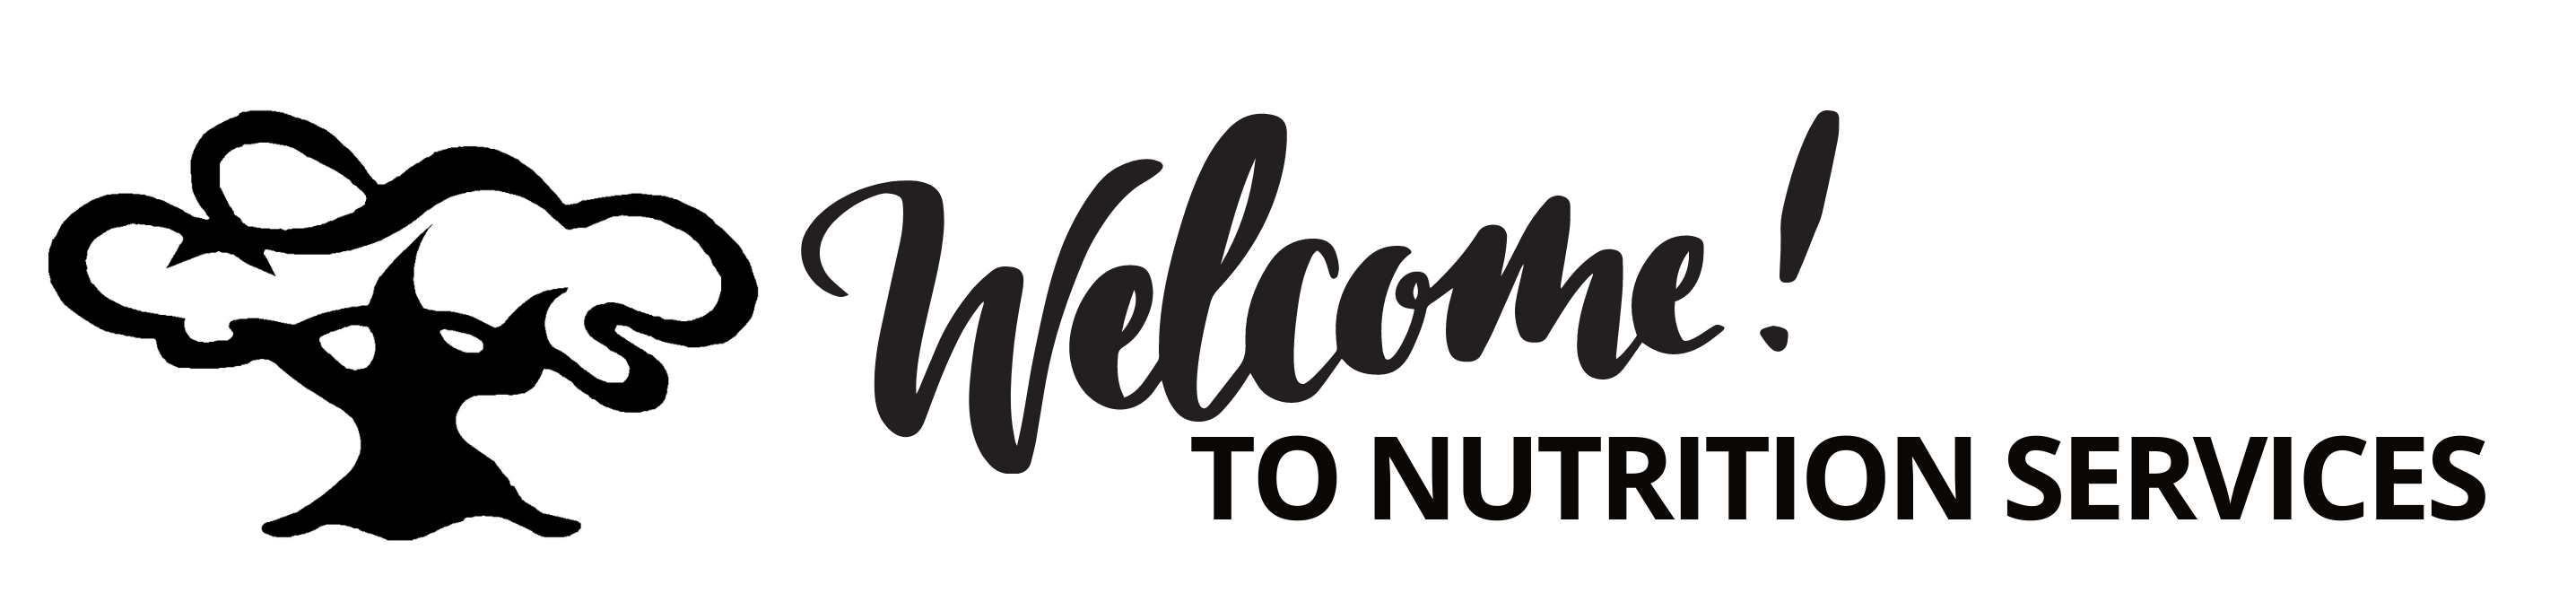 welcome sign.png